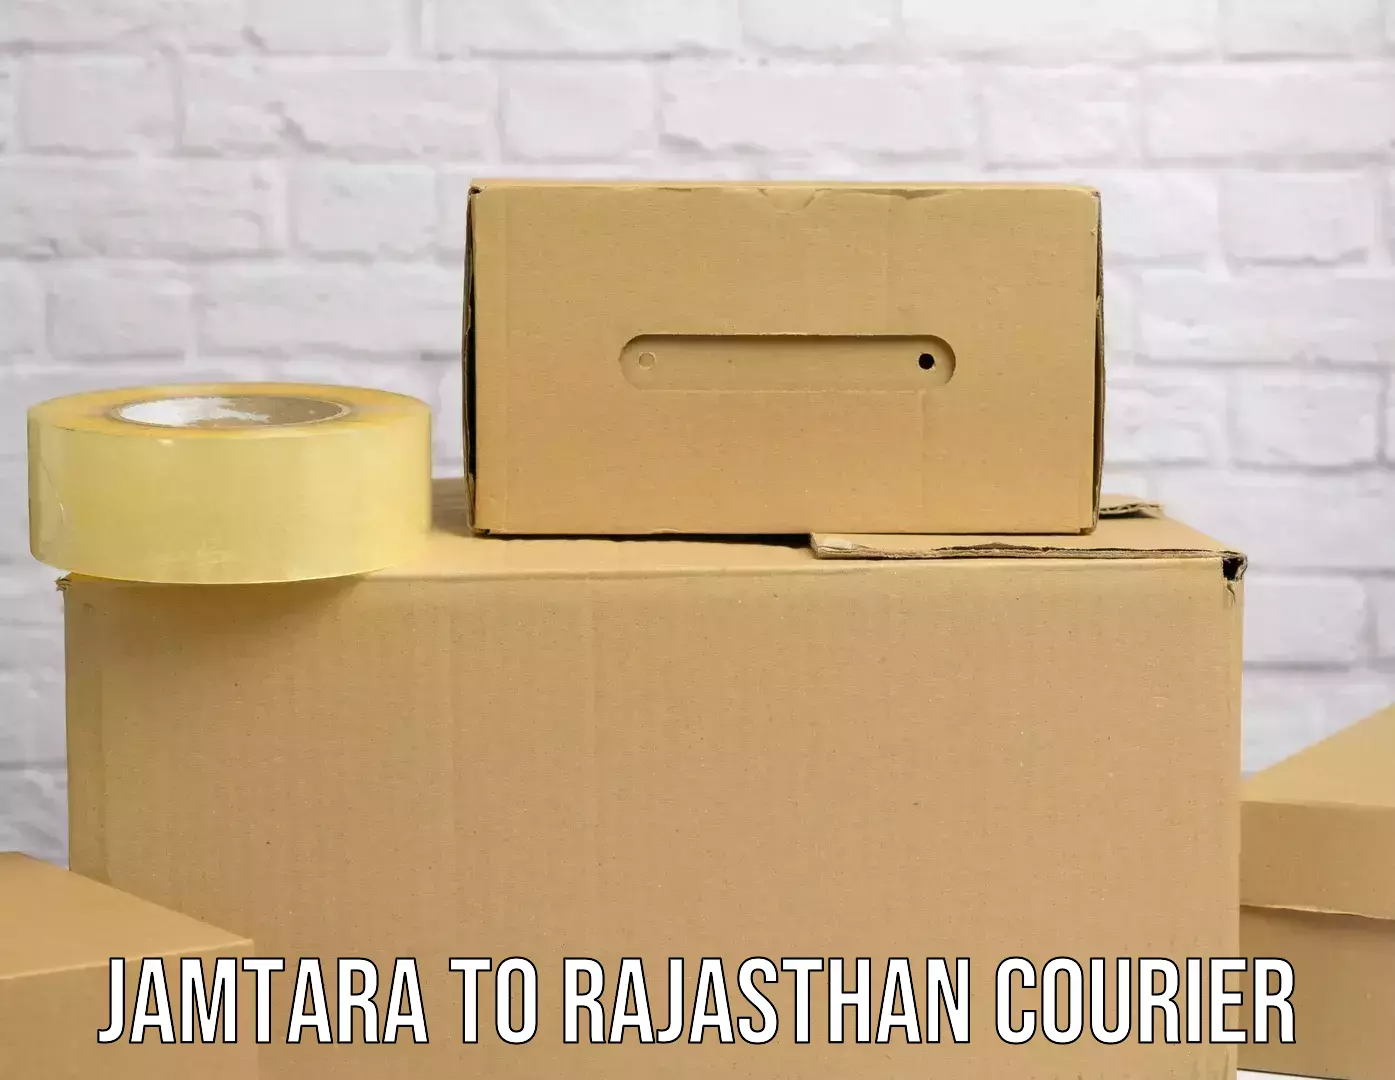 Supply chain delivery in Jamtara to Udaipur